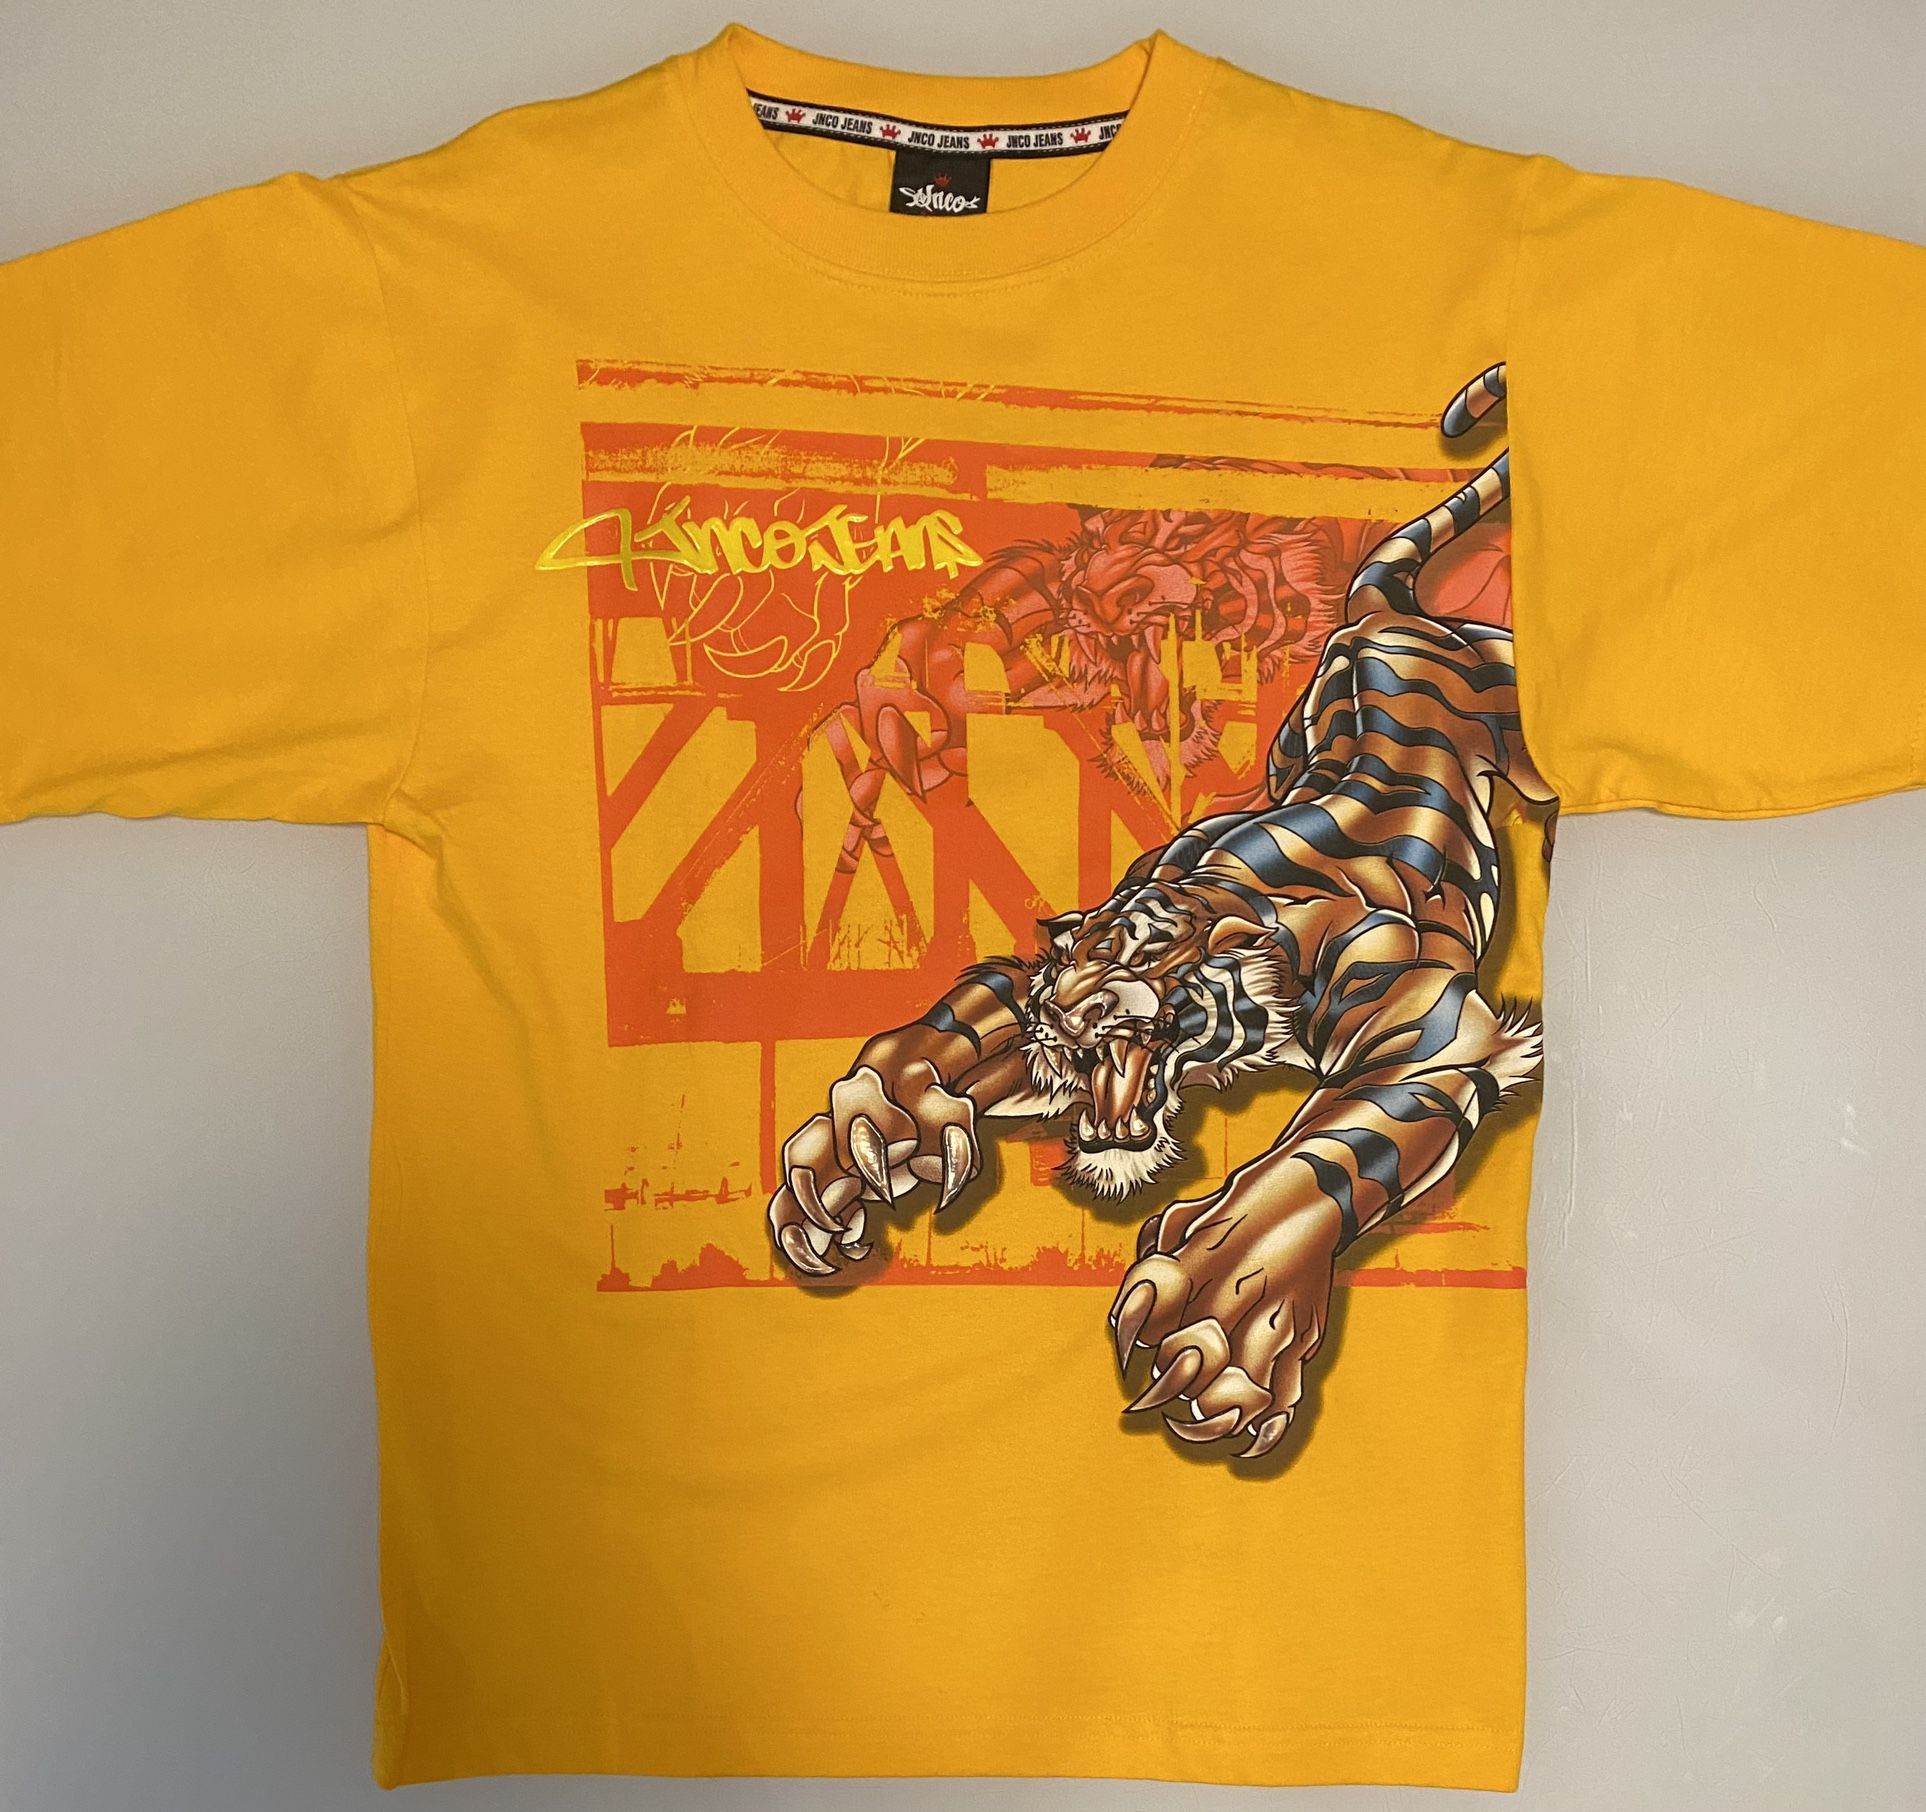 jnco Jeans T-shirt, size XL, featuring a tiger on the fron